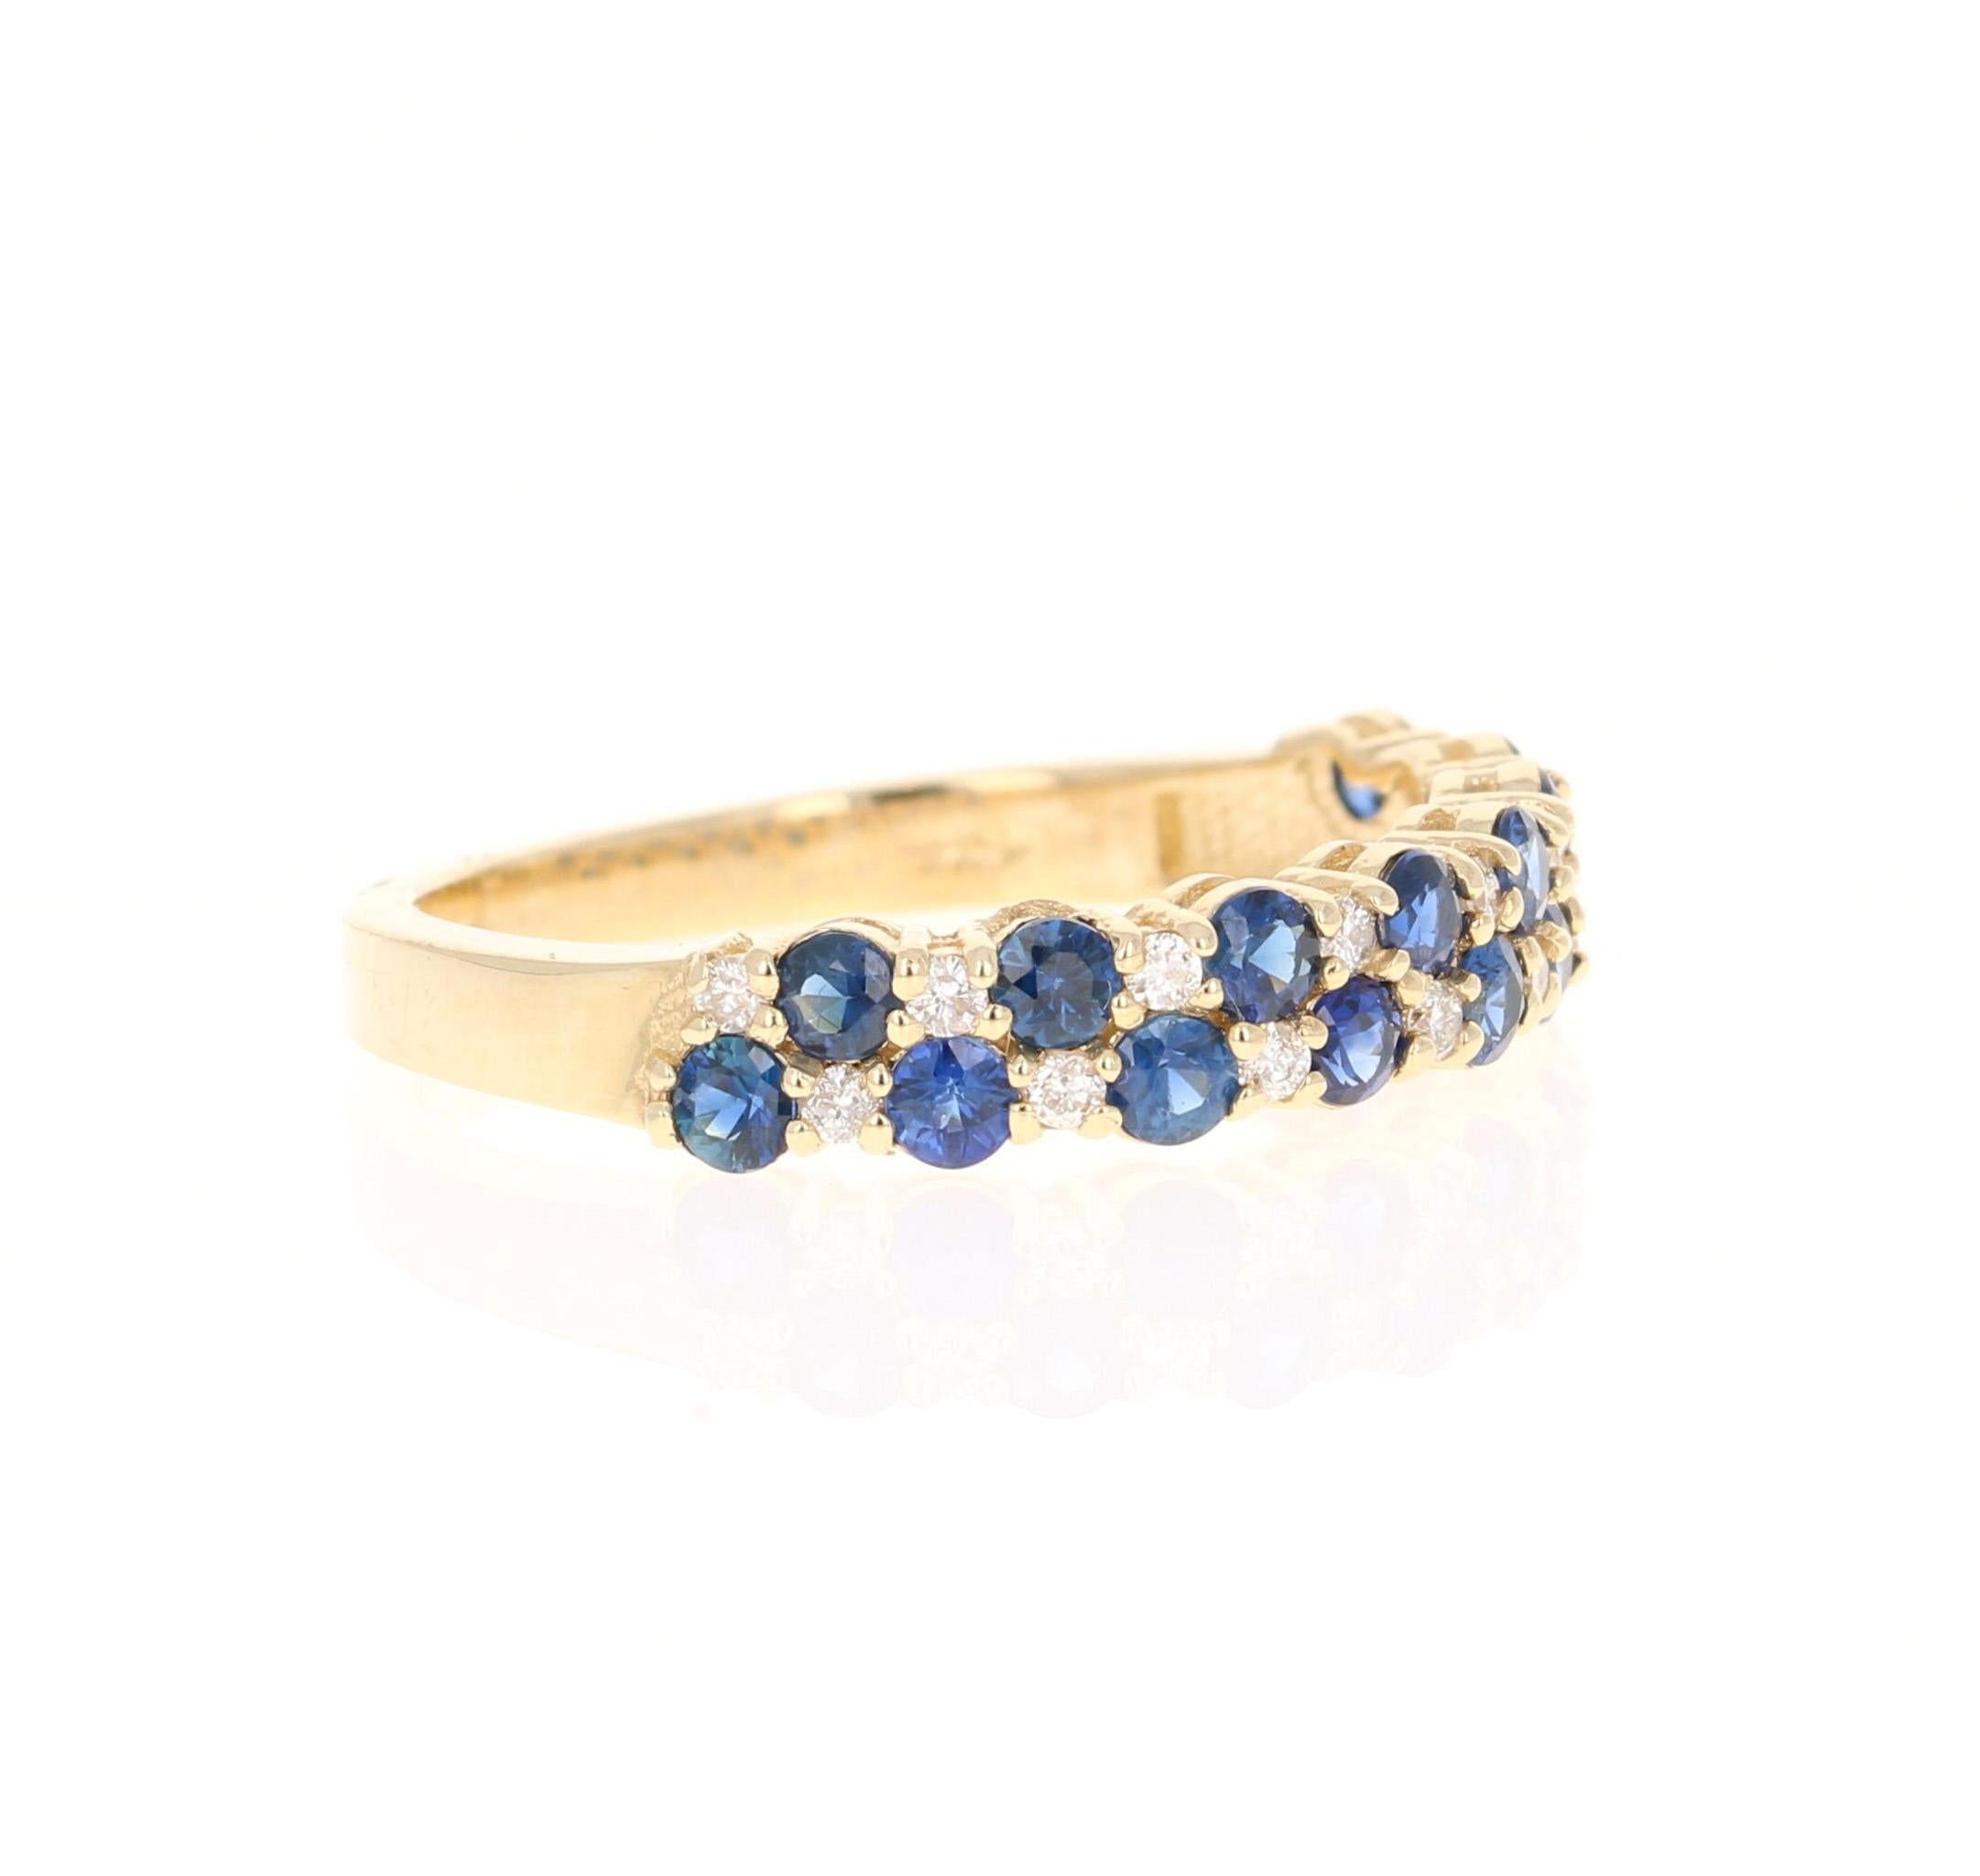 There are 16 Round Cut Sapphires that weigh 0.91 carats and 16 Round Cut Diamonds that weigh 0.16 carats (Clarity: SI, Color: F).  The total carat weight of the band is 1.07 carats. The band is made in 14K Yellow Gold and weighs approximately 2.3